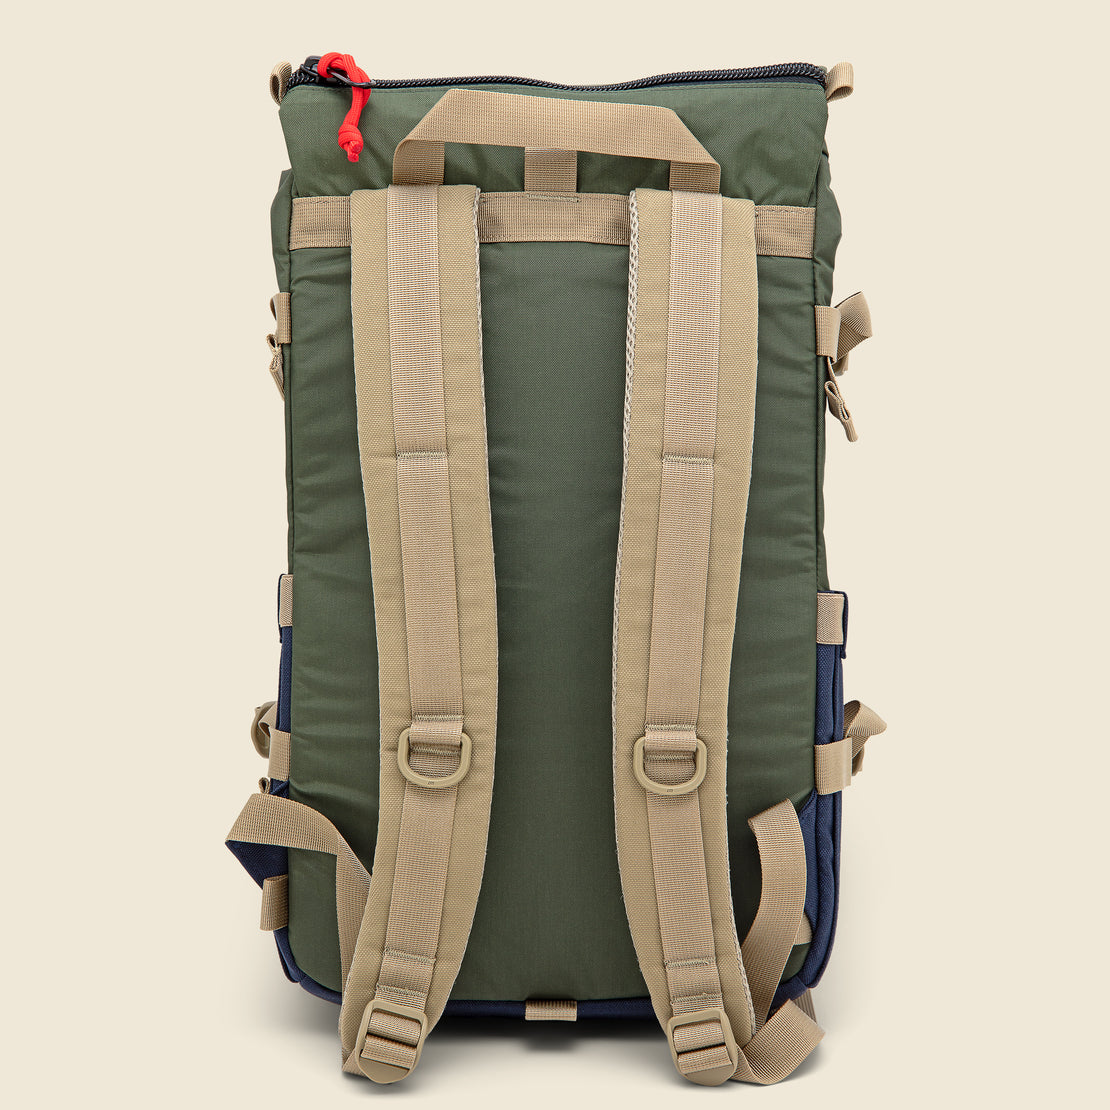 Rover Pack Classic - Olive/Navy - Topo Designs - STAG Provisions - Accessories - Bags / Luggage